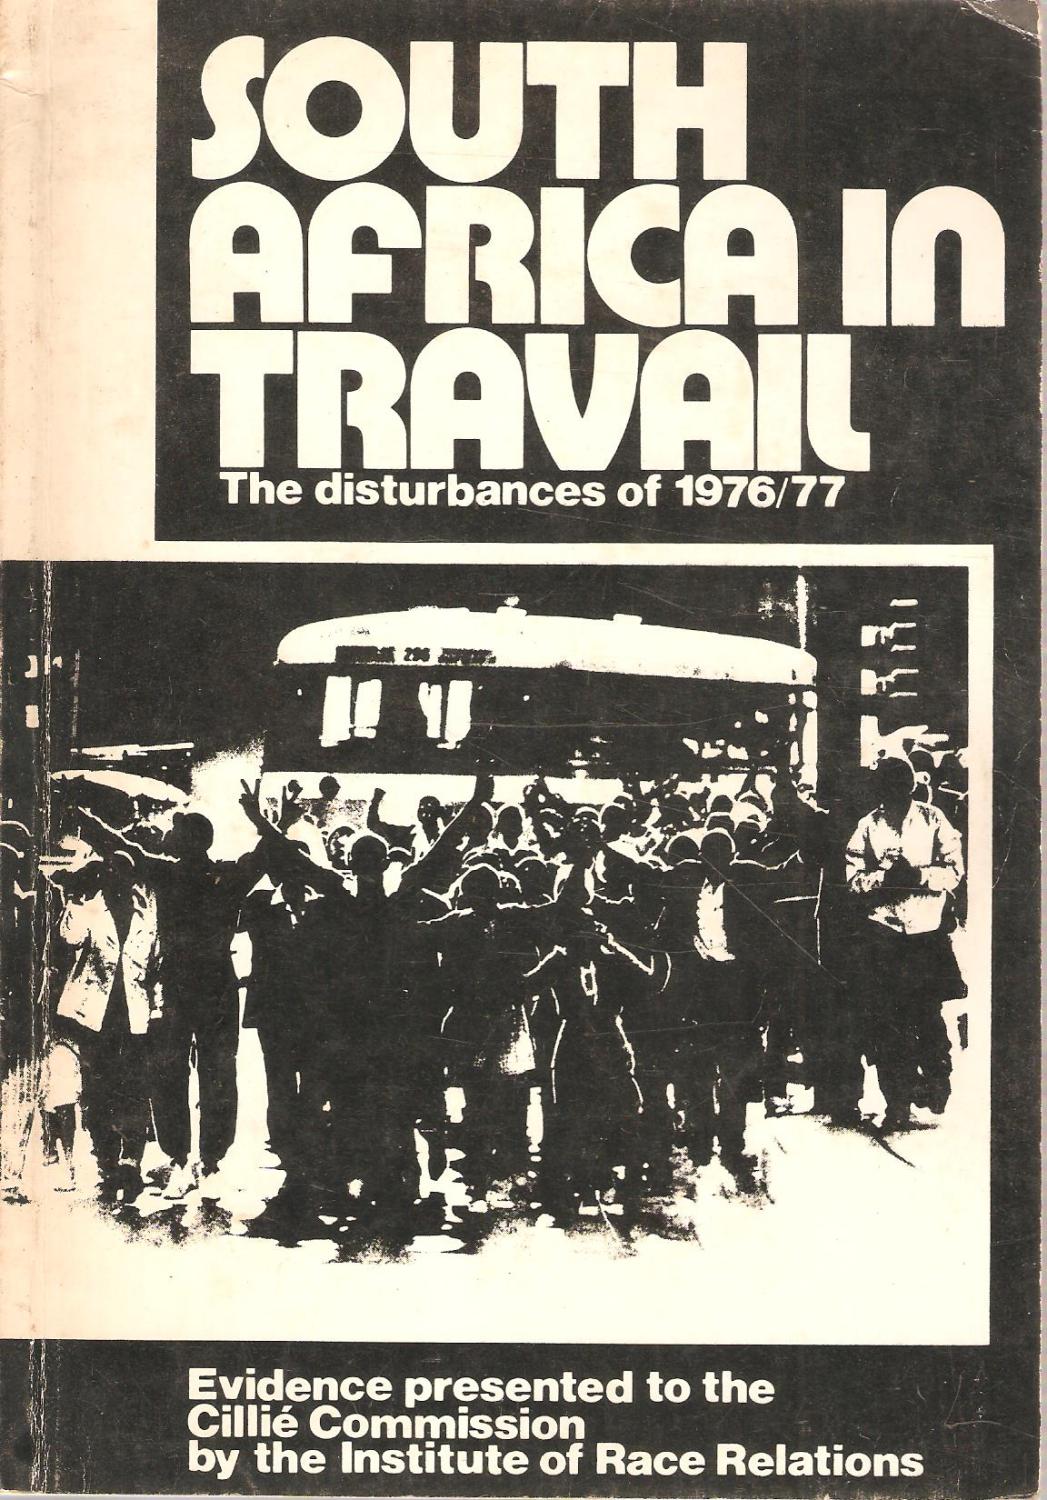 South Africa in Travail - The disturbances of 1976/77 - Evidence presented by the SA Institute of Race Relations to the Cillie Commission of Inquiry into the riots at Soweto and other places during June 1976